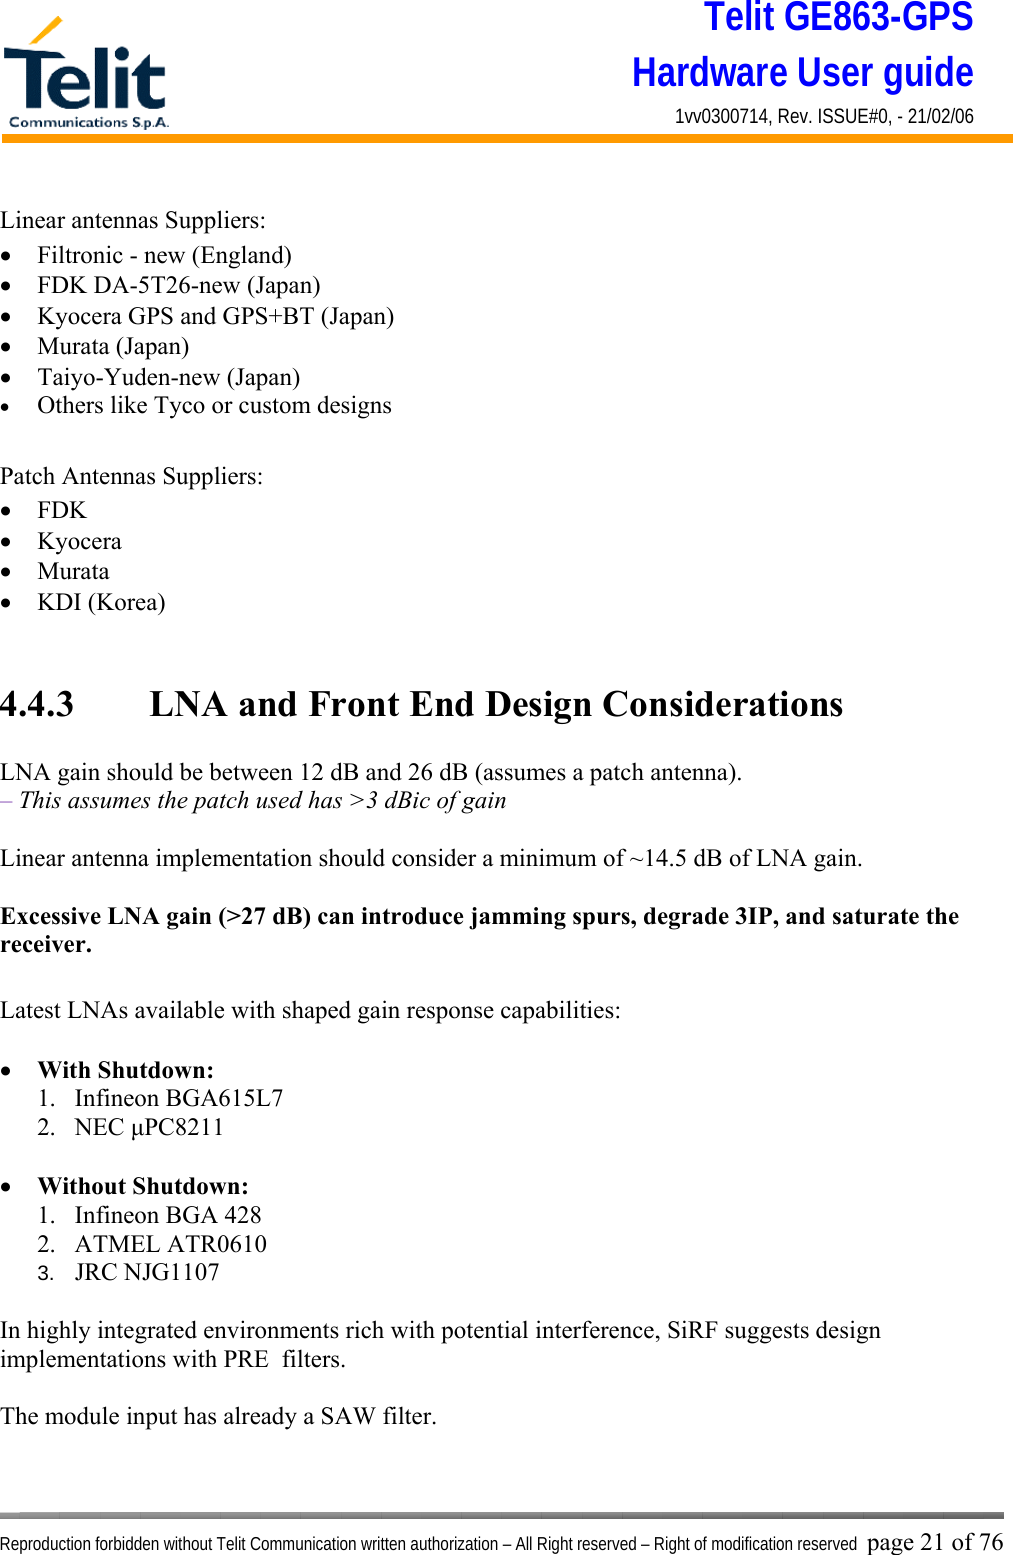 Telit GE863-GPS Hardware User guide 1vv0300714, Rev. ISSUE#0, - 21/02/06    Reproduction forbidden without Telit Communication written authorization – All Right reserved – Right of modification reserved page 21 of 76 Linear antennas Suppliers: •  Filtronic - new (England) •  FDK DA-5T26-new (Japan) •  Kyocera GPS and GPS+BT (Japan) •  Murata (Japan) •  Taiyo-Yuden-new (Japan) •  Others like Tyco or custom designs  Patch Antennas Suppliers: •  FDK •  Kyocera •  Murata •  KDI (Korea)   4.4.3   LNA and Front End Design Considerations  LNA gain should be between 12 dB and 26 dB (assumes a patch antenna). – This assumes the patch used has &gt;3 dBic of gain  Linear antenna implementation should consider a minimum of ~14.5 dB of LNA gain.  Excessive LNA gain (&gt;27 dB) can introduce jamming spurs, degrade 3IP, and saturate the receiver.  Latest LNAs available with shaped gain response capabilities:  •  With Shutdown: 1. Infineon BGA615L7 2. NEC μPC8211  •  Without Shutdown: 1.  Infineon BGA 428 2. ATMEL ATR0610 3.  JRC NJG1107  In highly integrated environments rich with potential interference, SiRF suggests design implementations with PRE  filters.  The module input has already a SAW filter.  